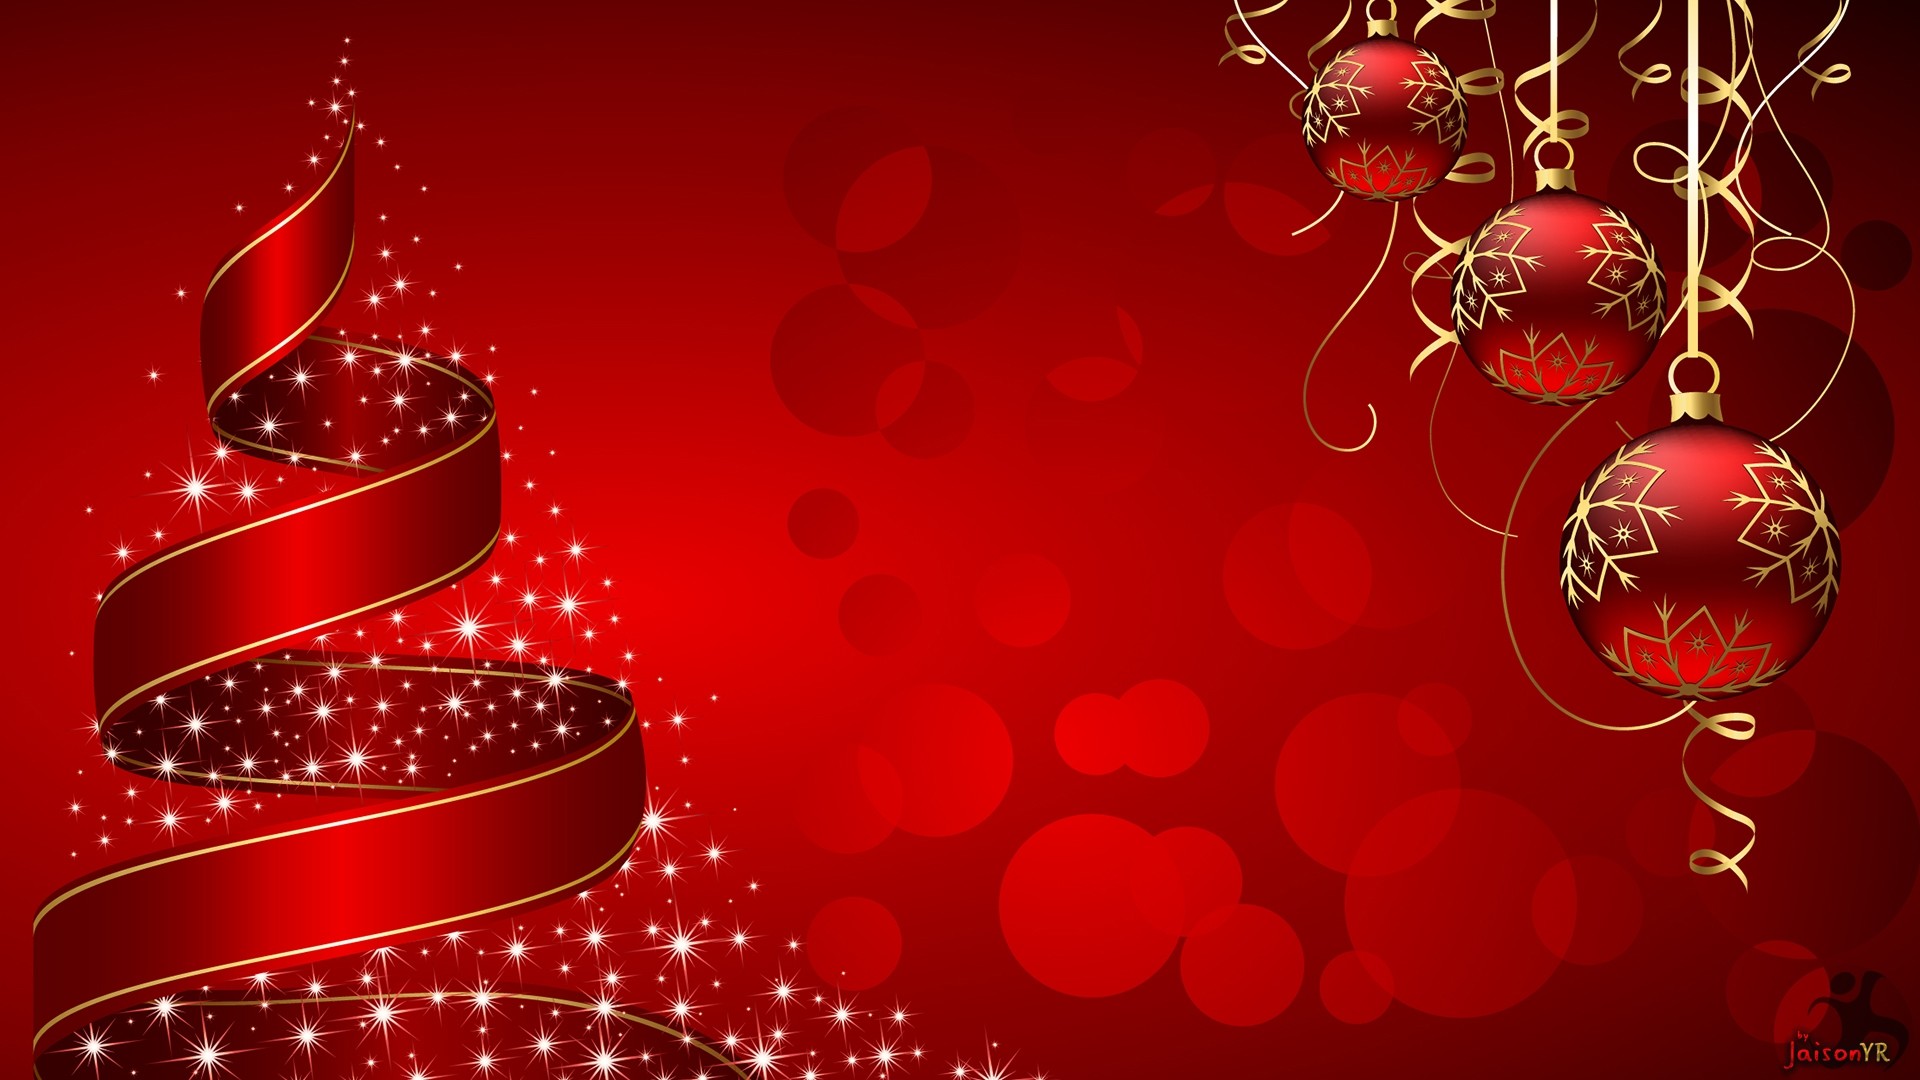 1920x1080 Search Results for “red and gold christmas tree wallpaper” – Adorable  Wallpapers